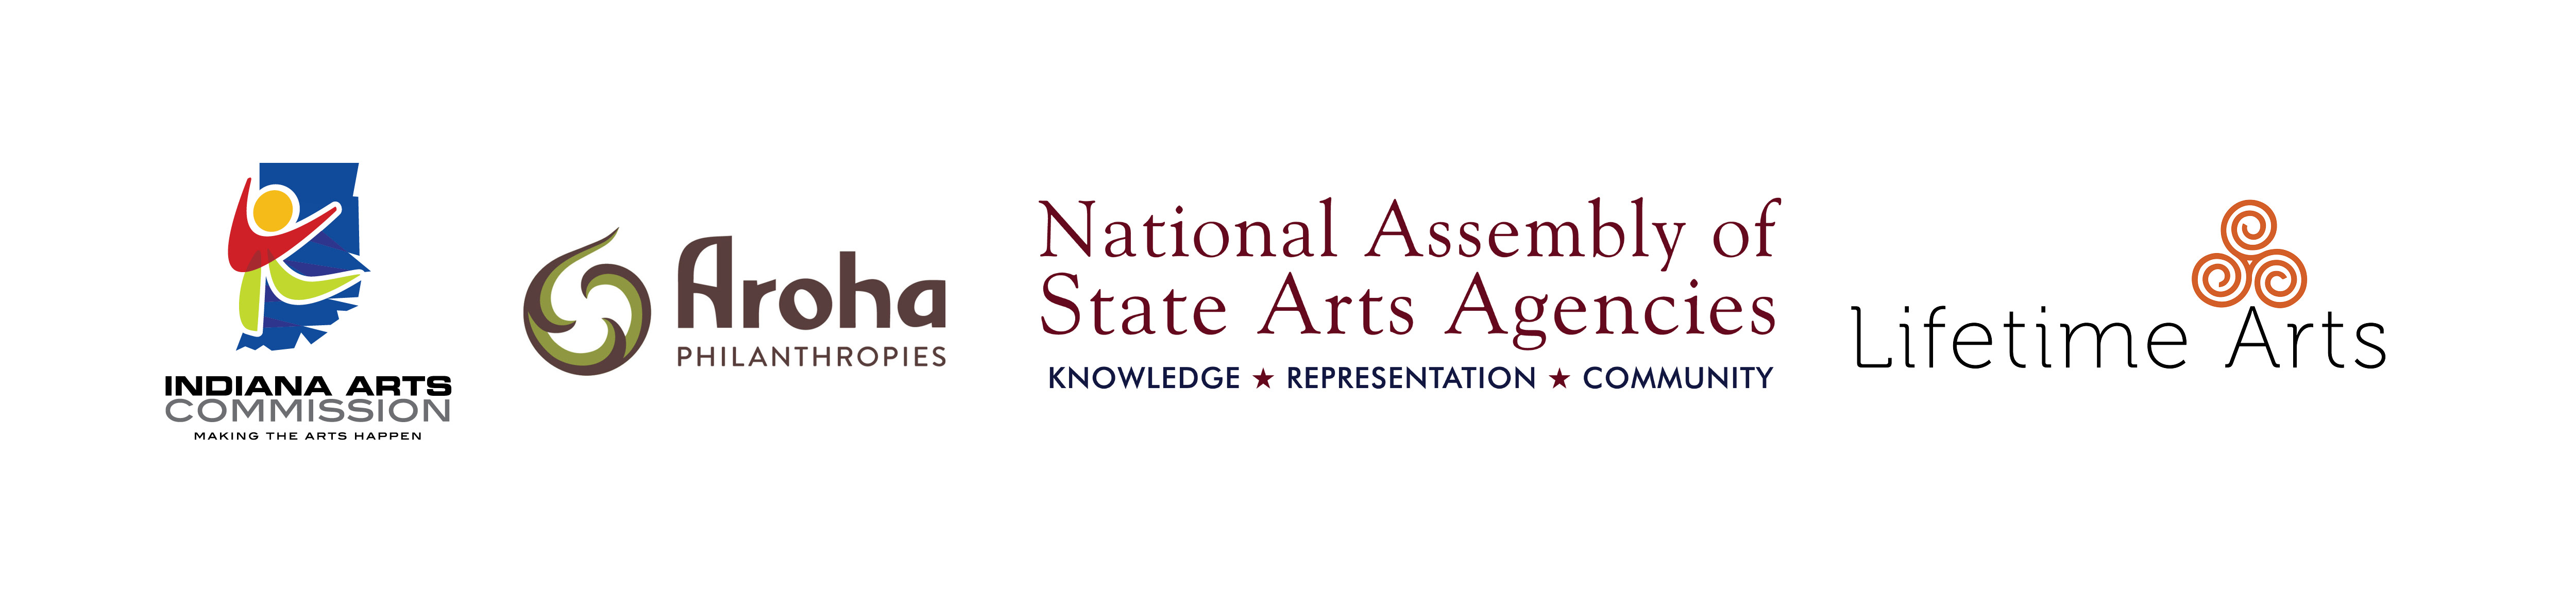 IAC, Aroha Philanthropies, National Assembly of State Arts Agenices, and Lifetime Arts Logs